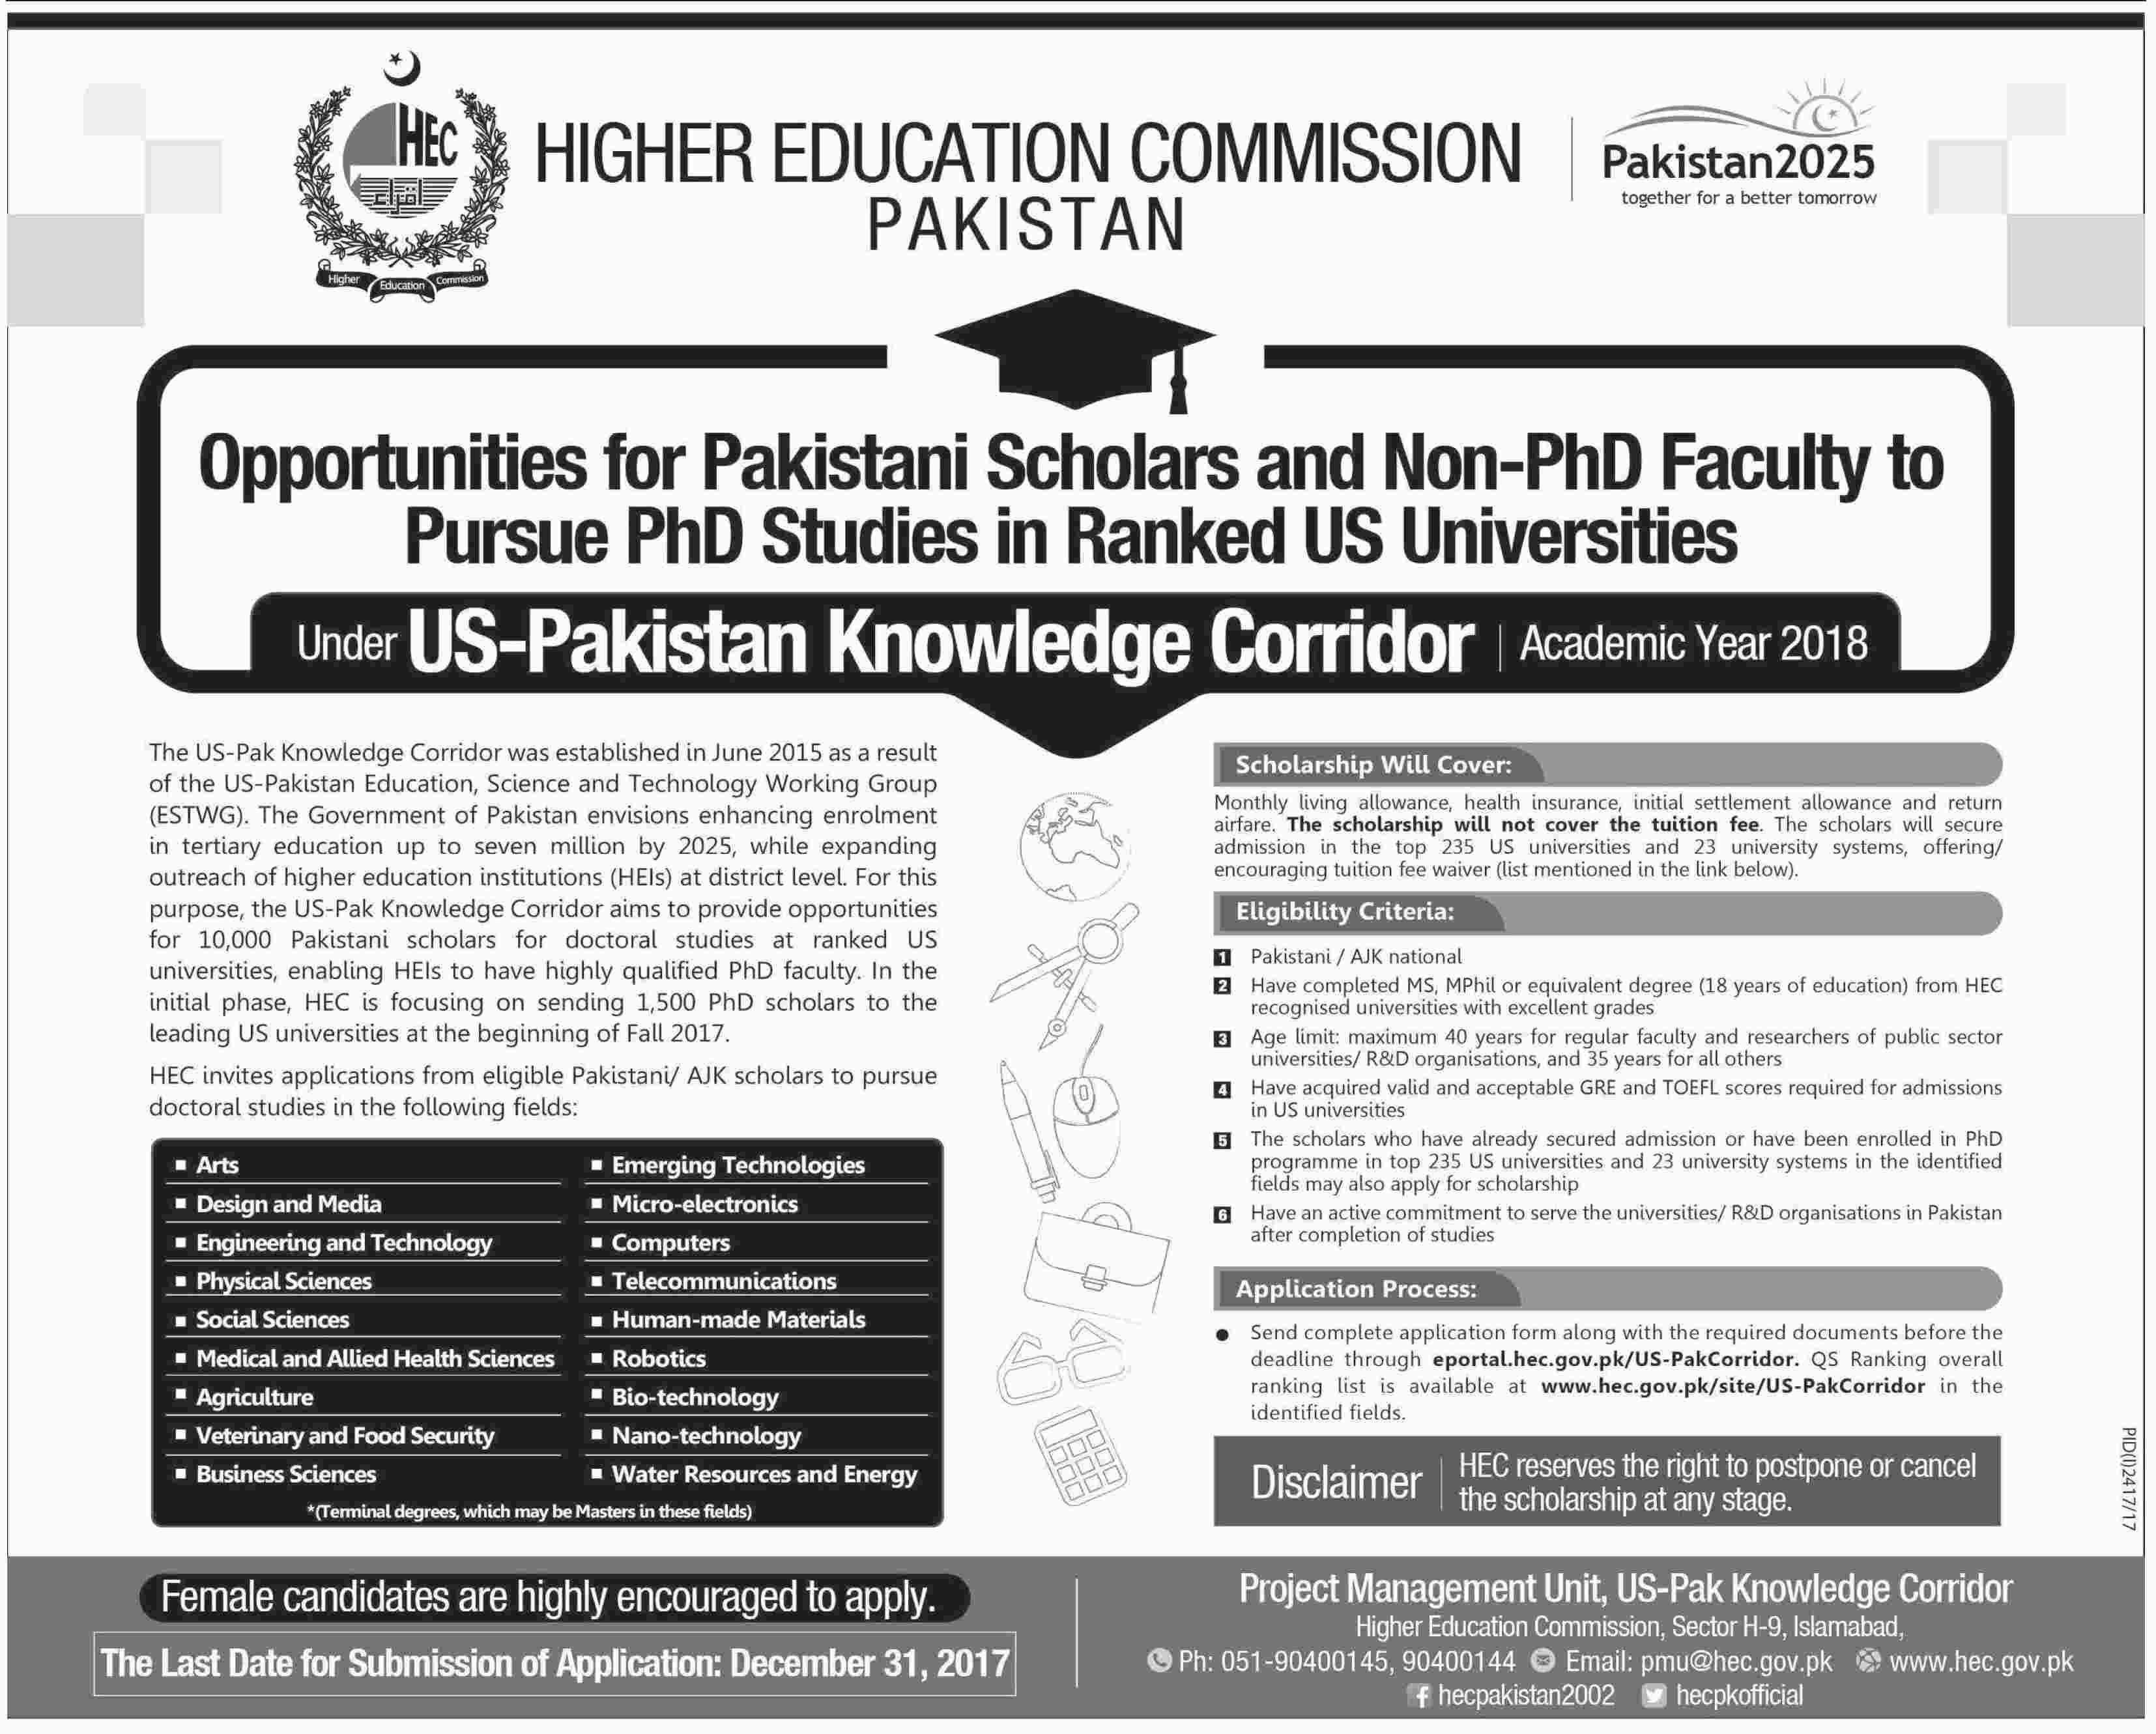 Opportunities for Pakistani Scholars and Non-PhD Faculty to Pursue PhD Studies in Ranked US Universities